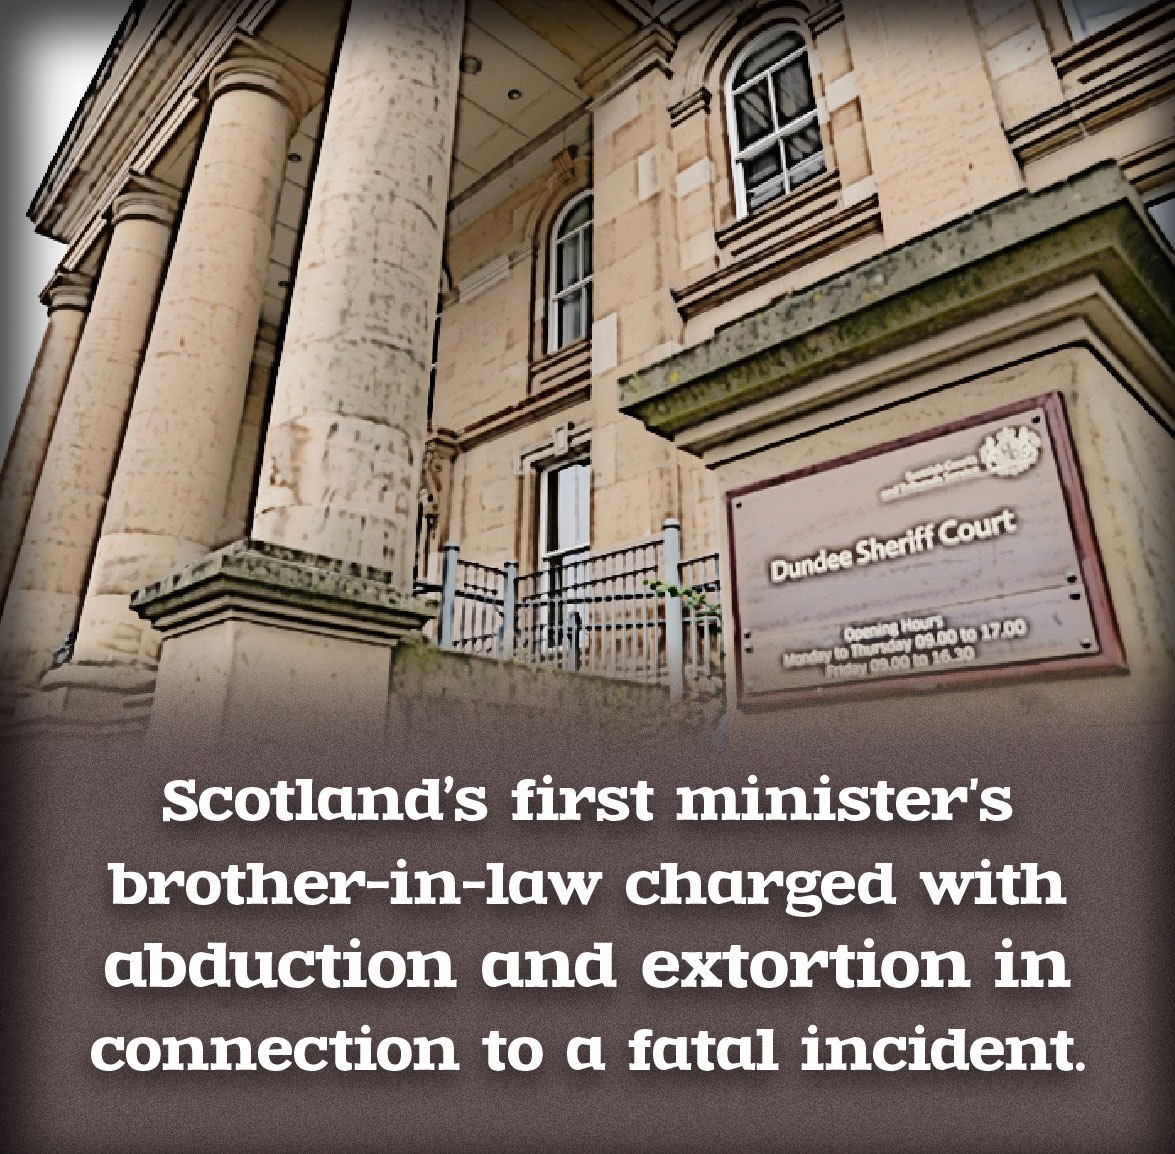 The brother-in-law of the First Minister of Scotland has been charged with kidnapping and extortion in the case of a man who died after falling from a window.